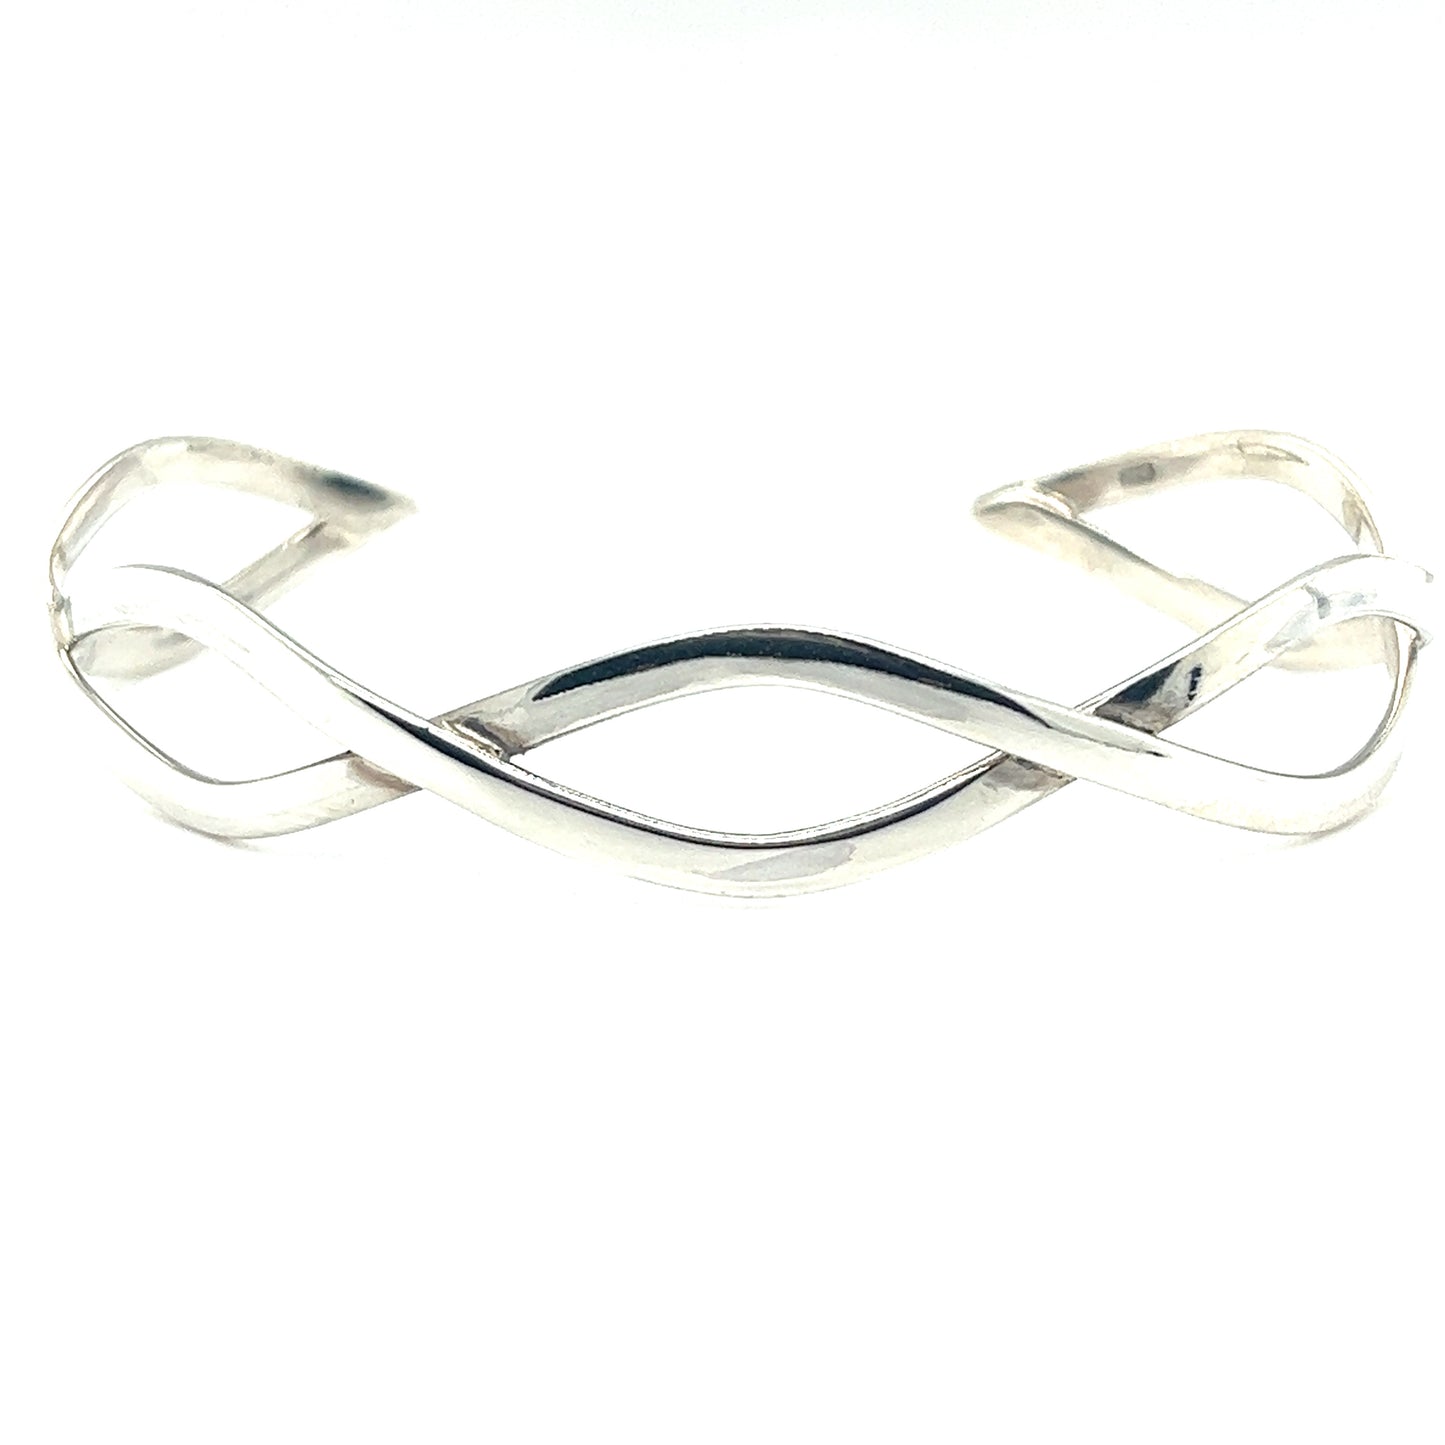 A Stylish Twisted Silver Cuff bracelet adorned with a twisting pattern and an infinity design by Super Silver.